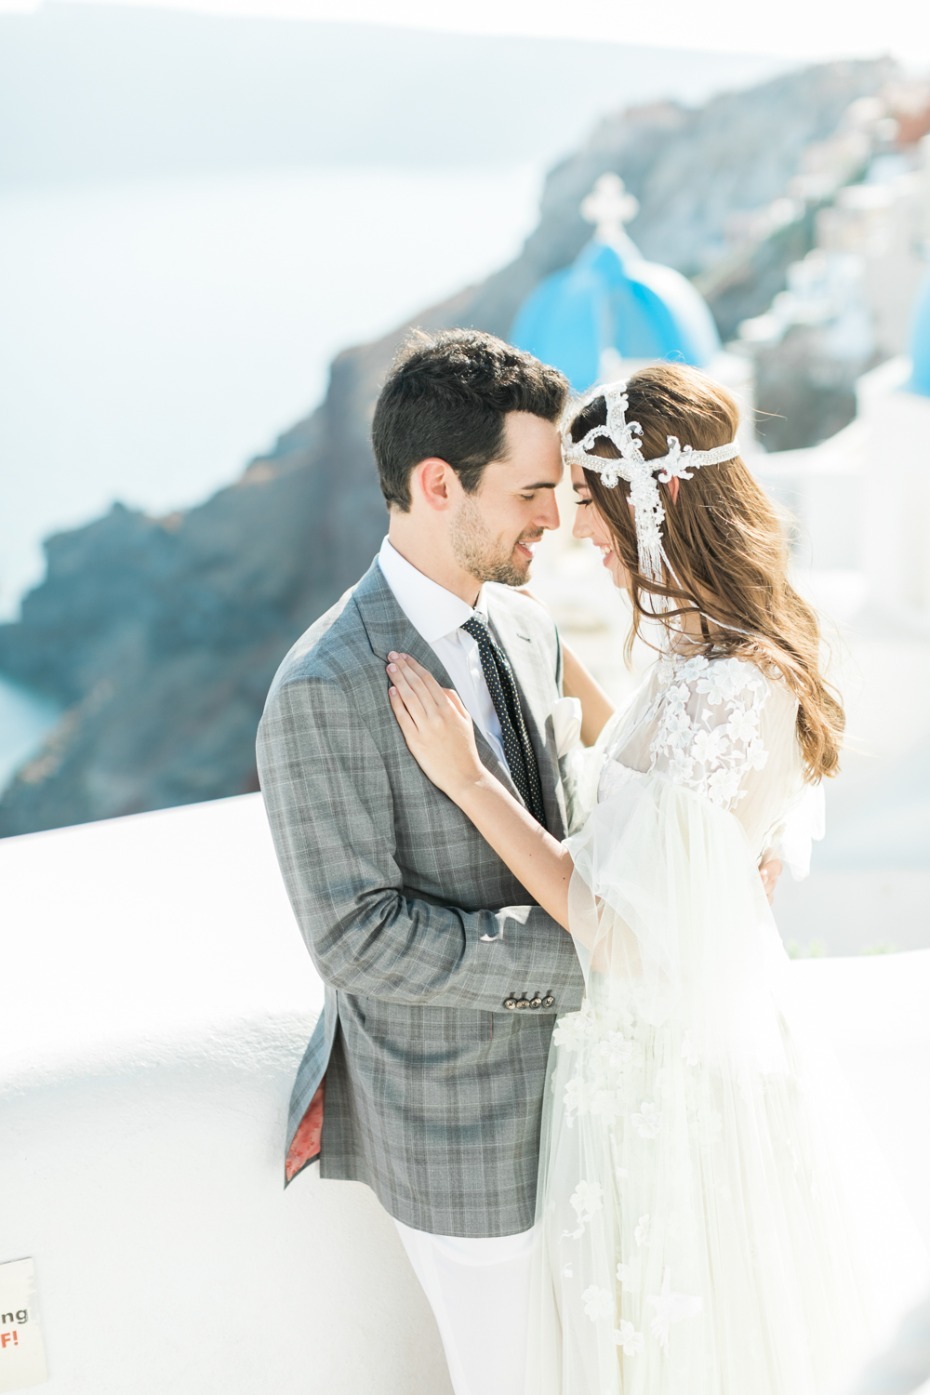 Qualities That Make Up the Ideal Destination Wedding Location